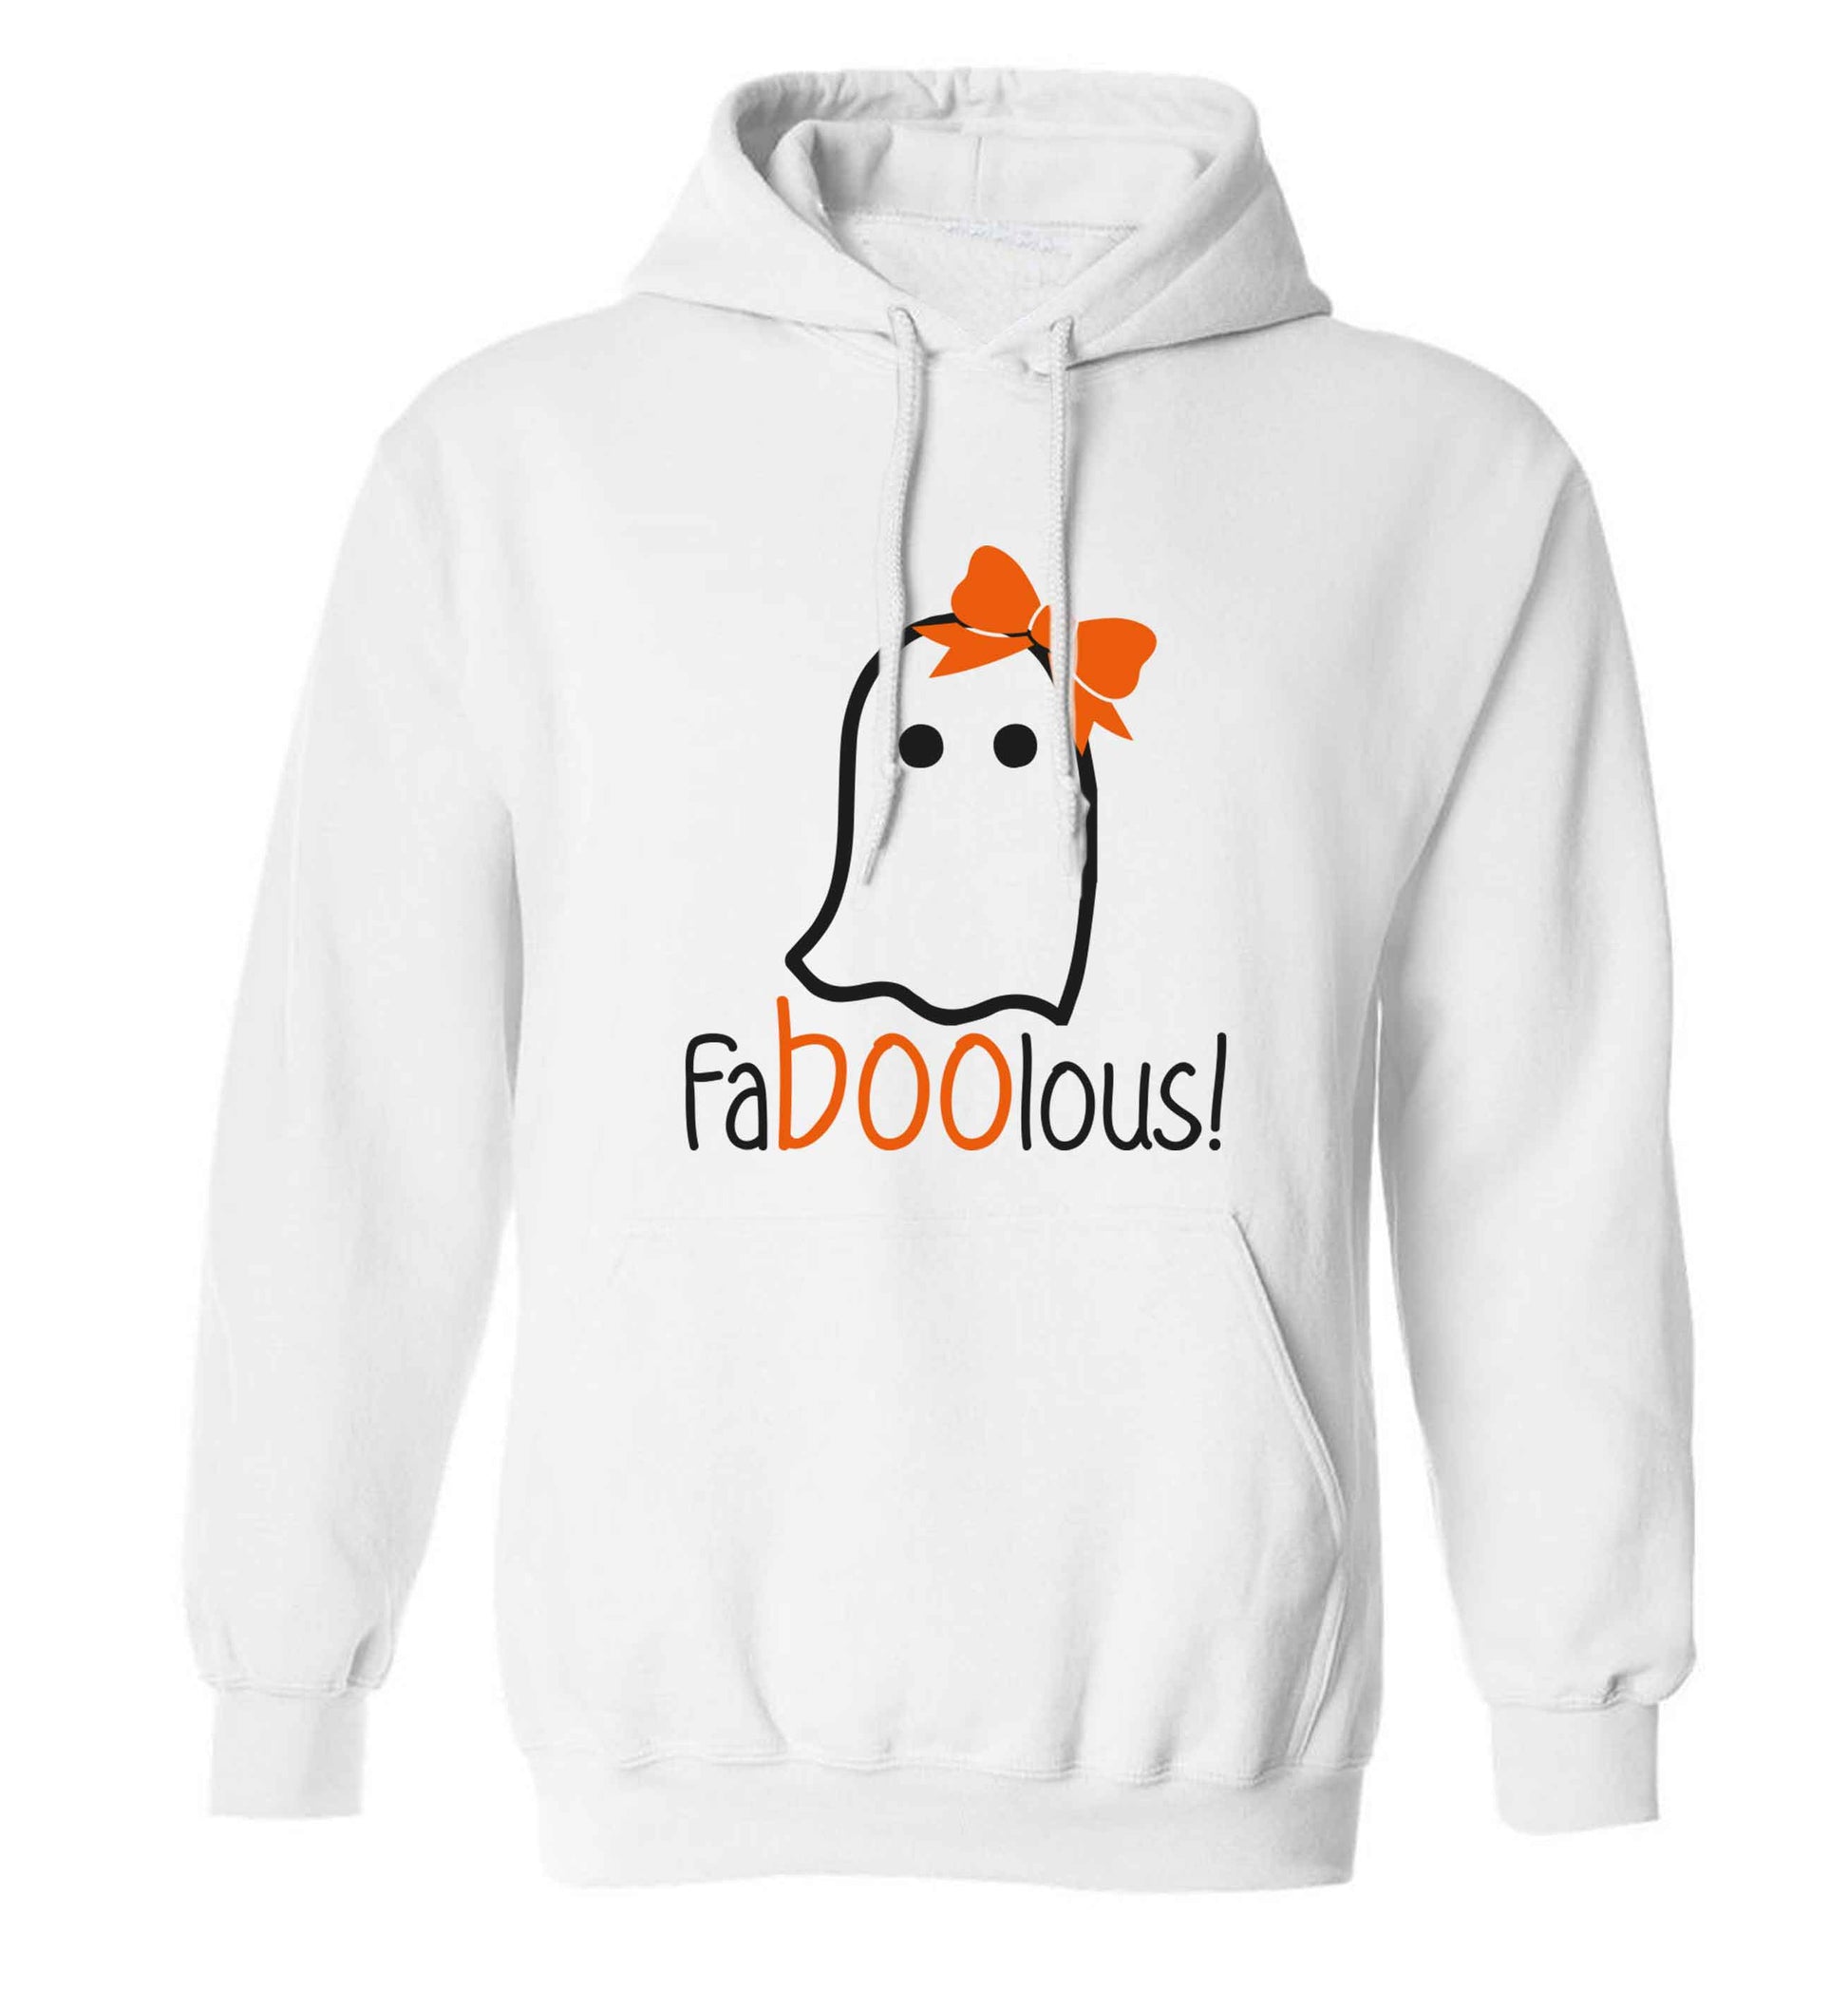 Faboolous ghost adults unisex white hoodie 2XL